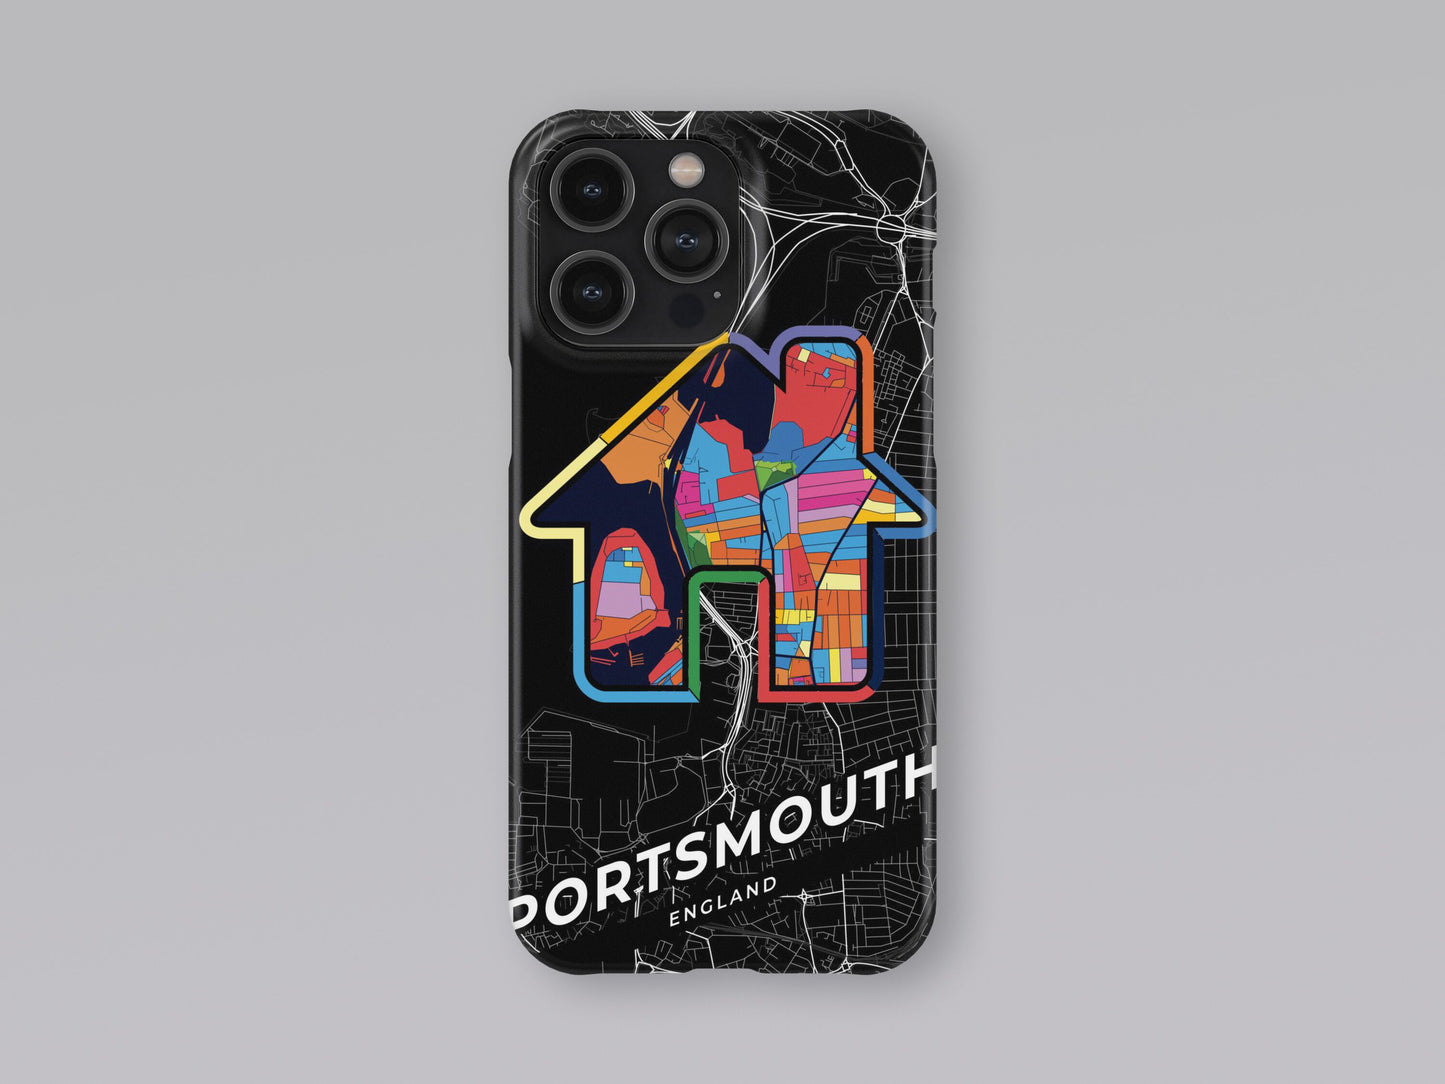 Portsmouth England slim phone case with colorful icon. Birthday, wedding or housewarming gift. Couple match cases. 3